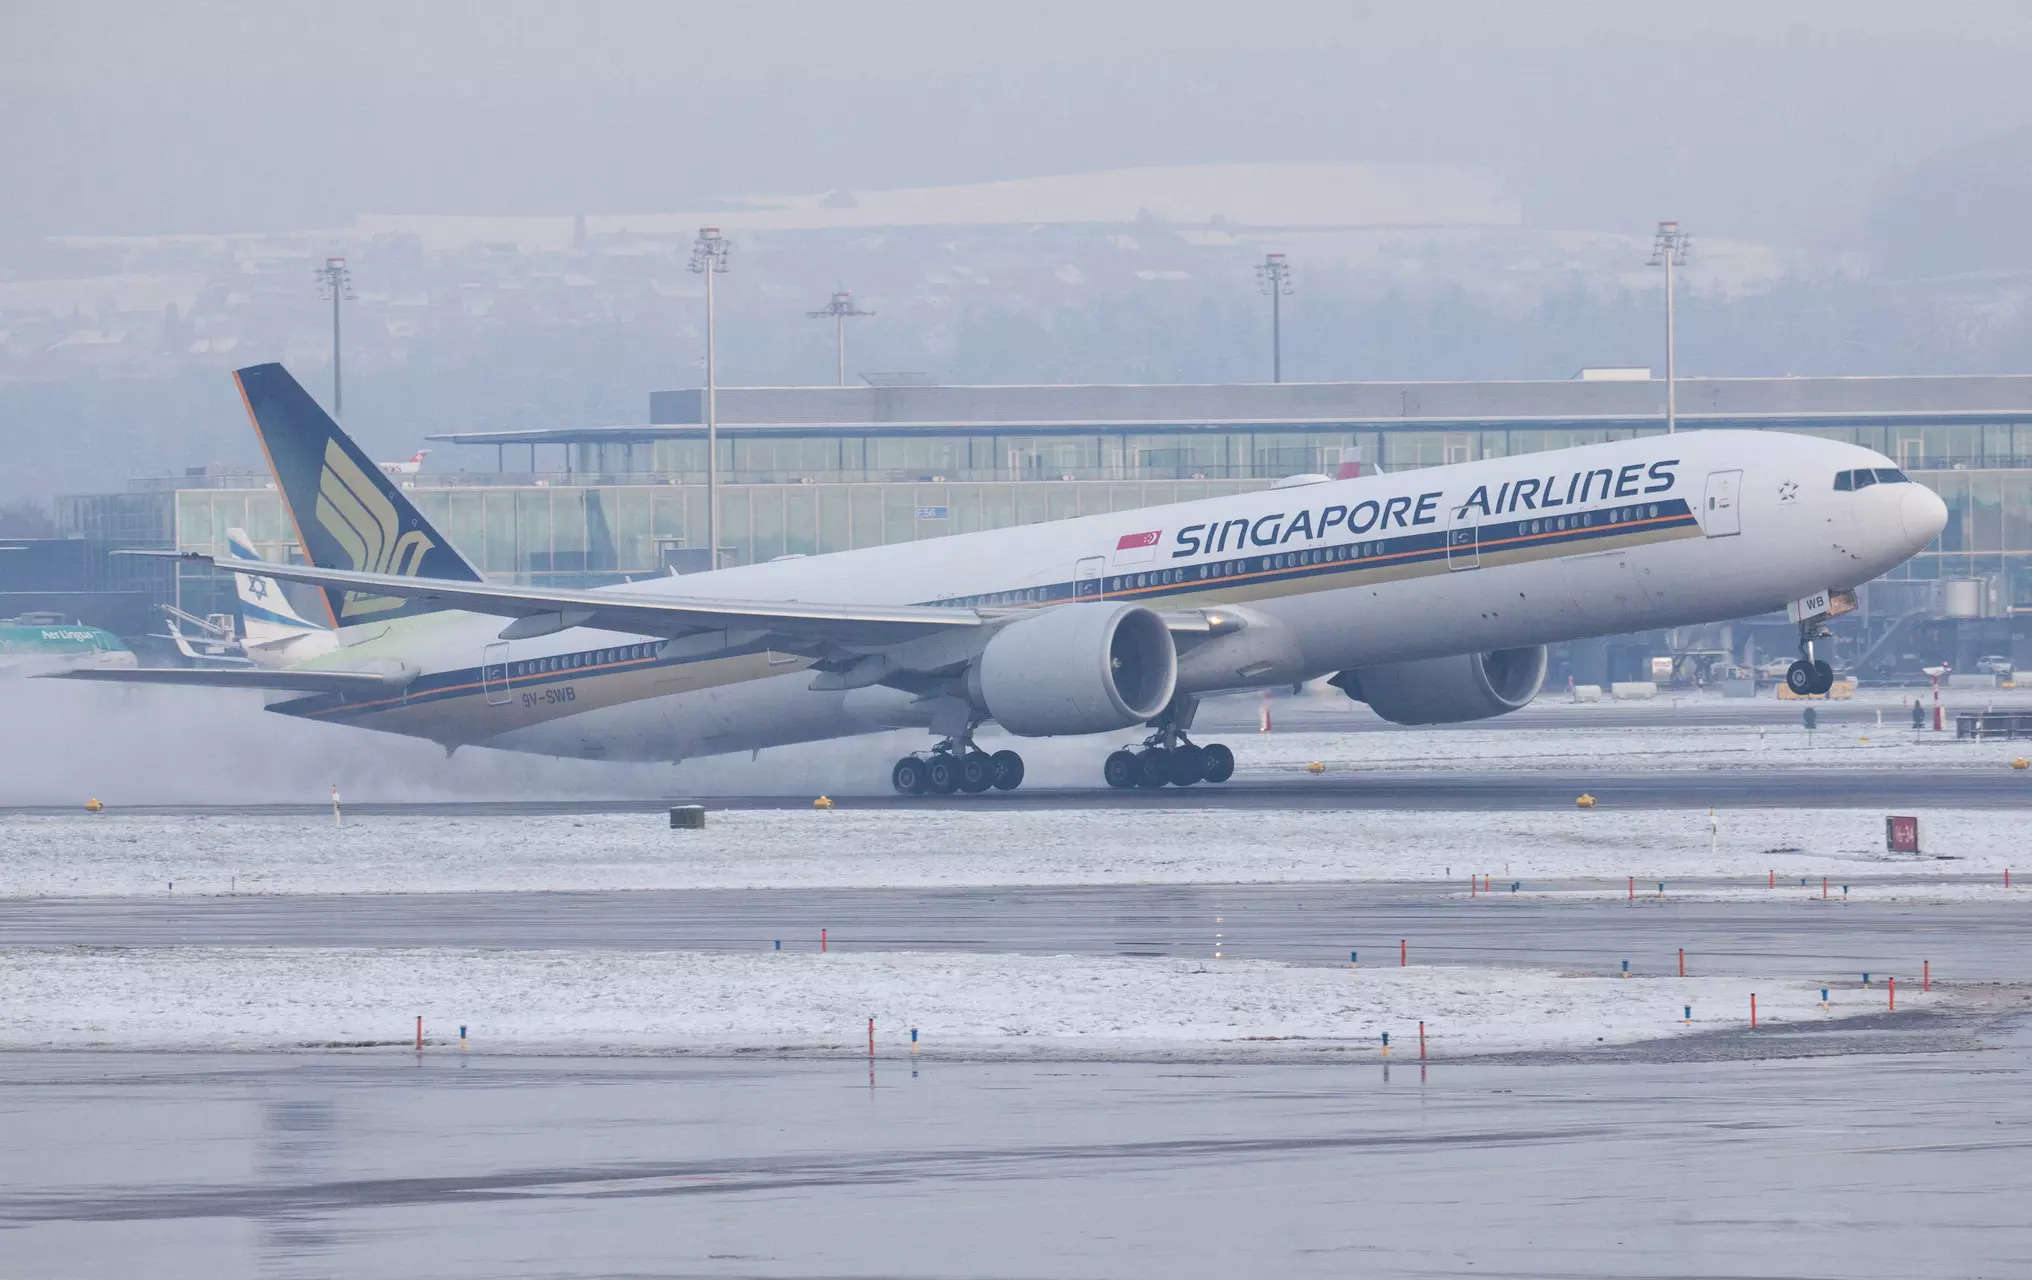 Singapore Airlines flight makes emergency landing in Bangkok, one dead, 30 injuries reported 